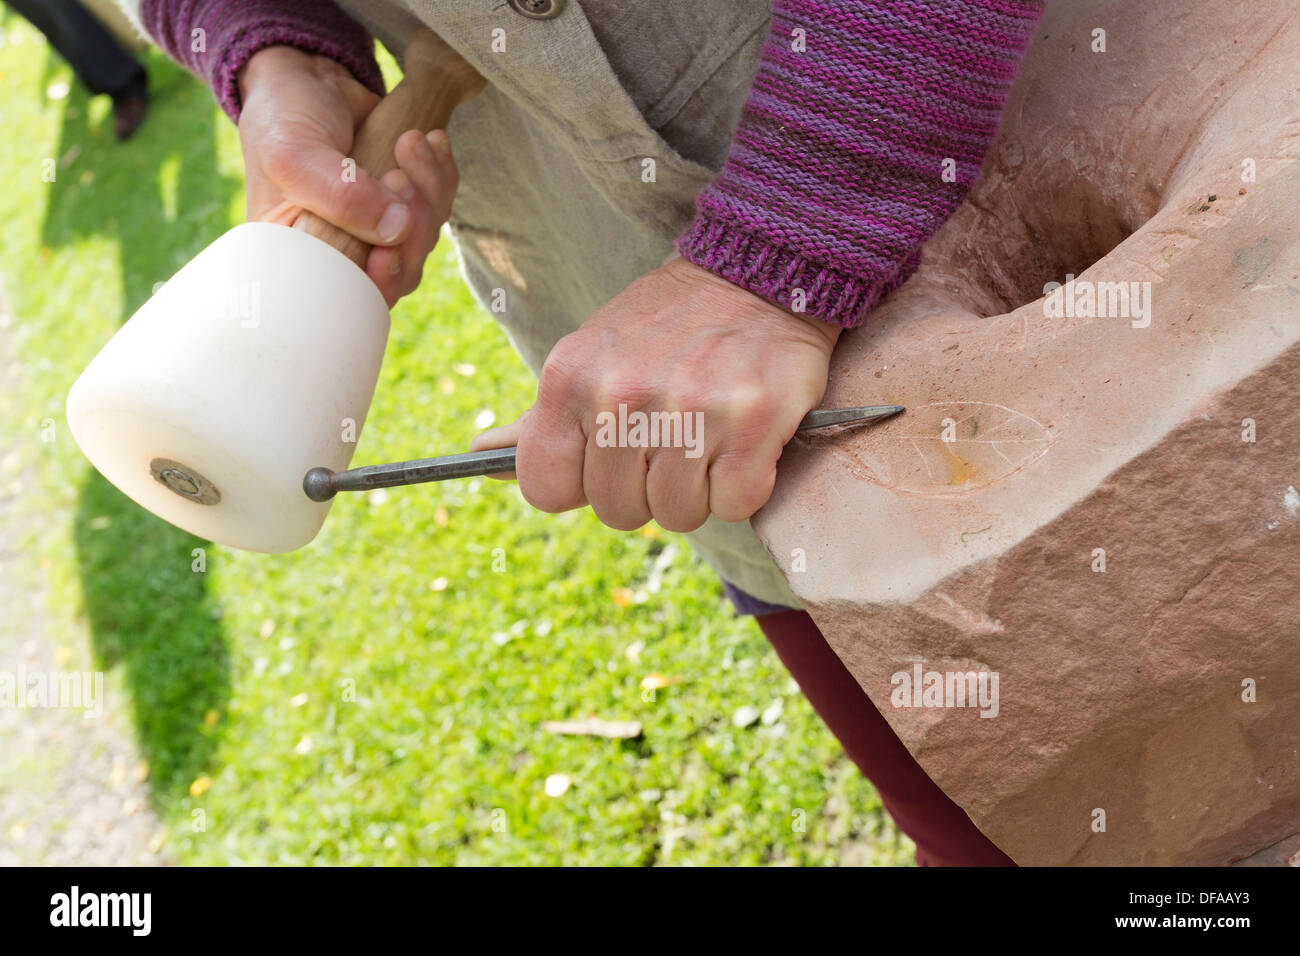 Person Practicing Stone Carving Skills UK Stock Photo